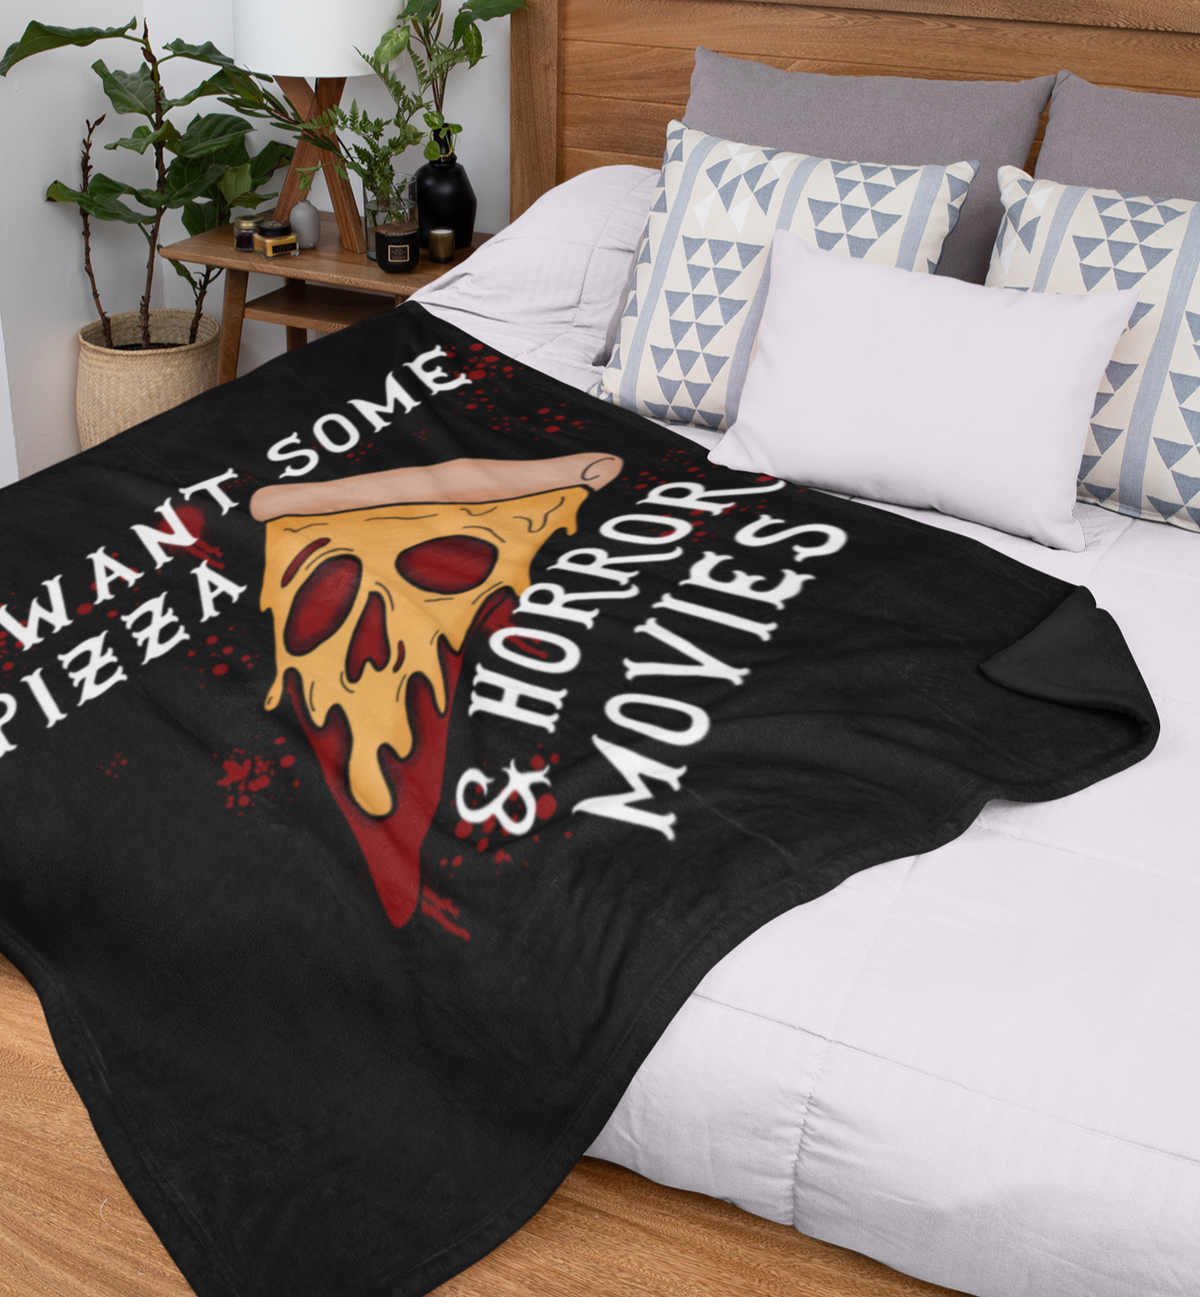 Black blanket with a pizza saying I want some pizza and horror movies - HighCiti